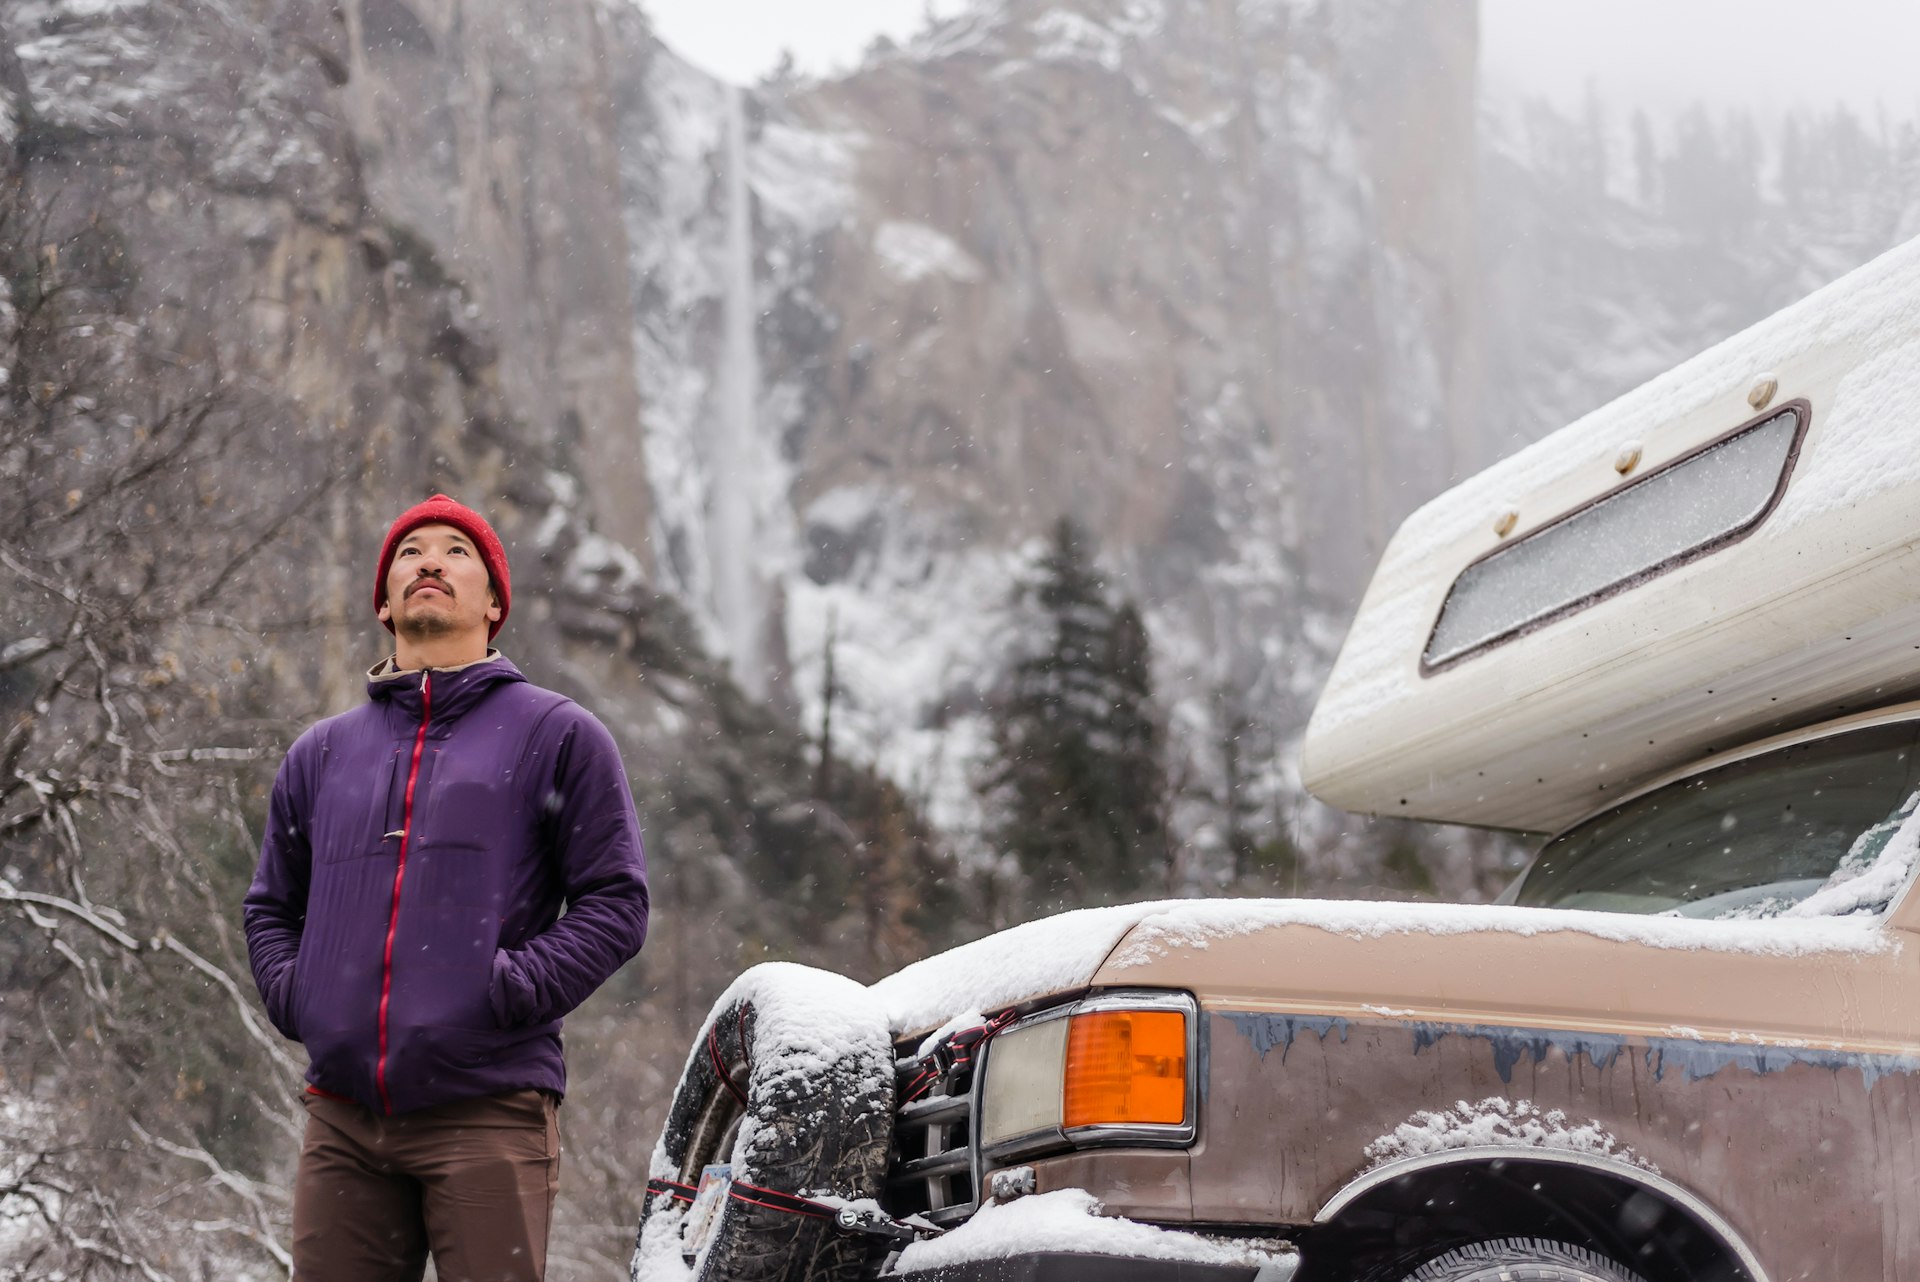 A man wearing snow gear stands in front of an icy waterfall next to an RV